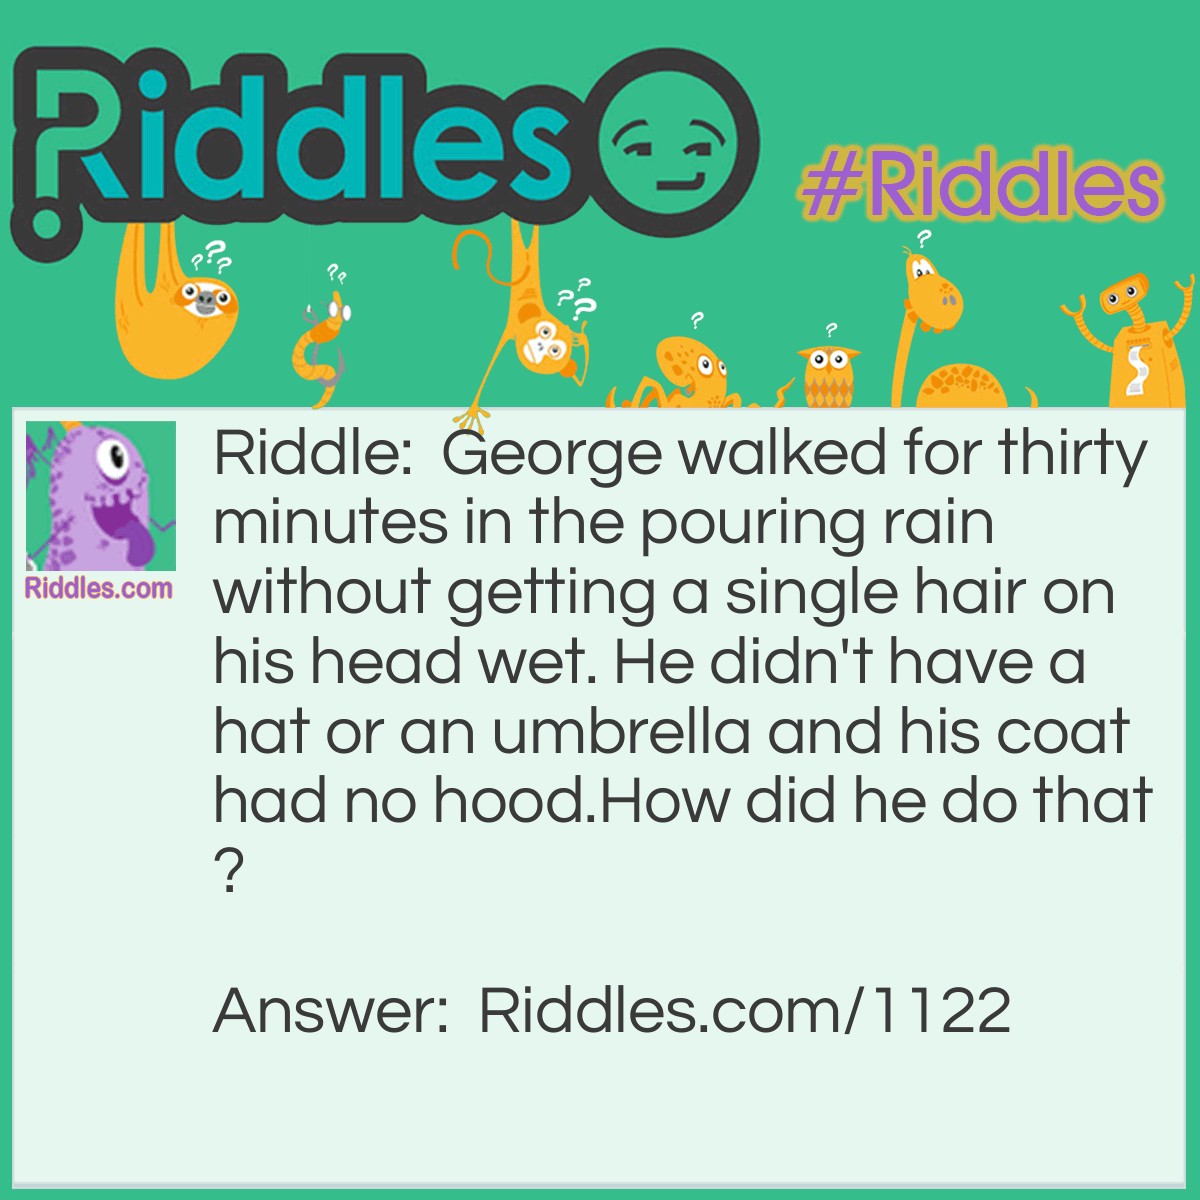 Riddle: George walked for thirty minutes in the pouring rain without getting a single hair on his head wet. He didn't have a hat or an umbrella and his coat had no hood.
How did he do that? Answer: He was bald.